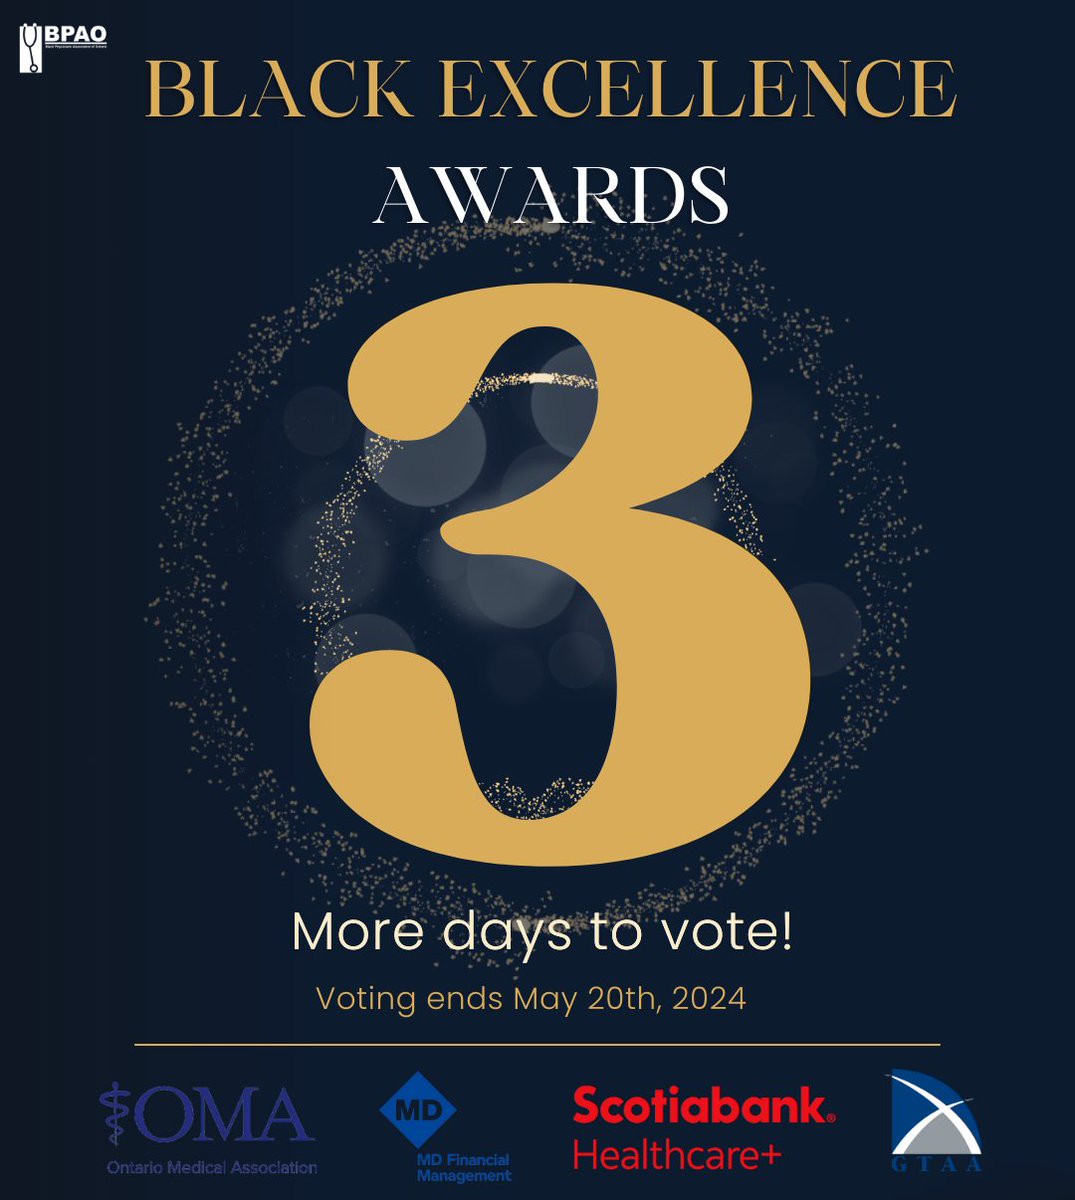 3 days left to submit your vote for the Black Excellence Awards! 🏆 Join us in celebrating the brilliance in our community at the Black Joy Gala. Voting ends on May 20th, 2024. Cast your vote now at loom.ly/_JsT7F4 #BlackExcellence #BlackJoyGala #VoteNow